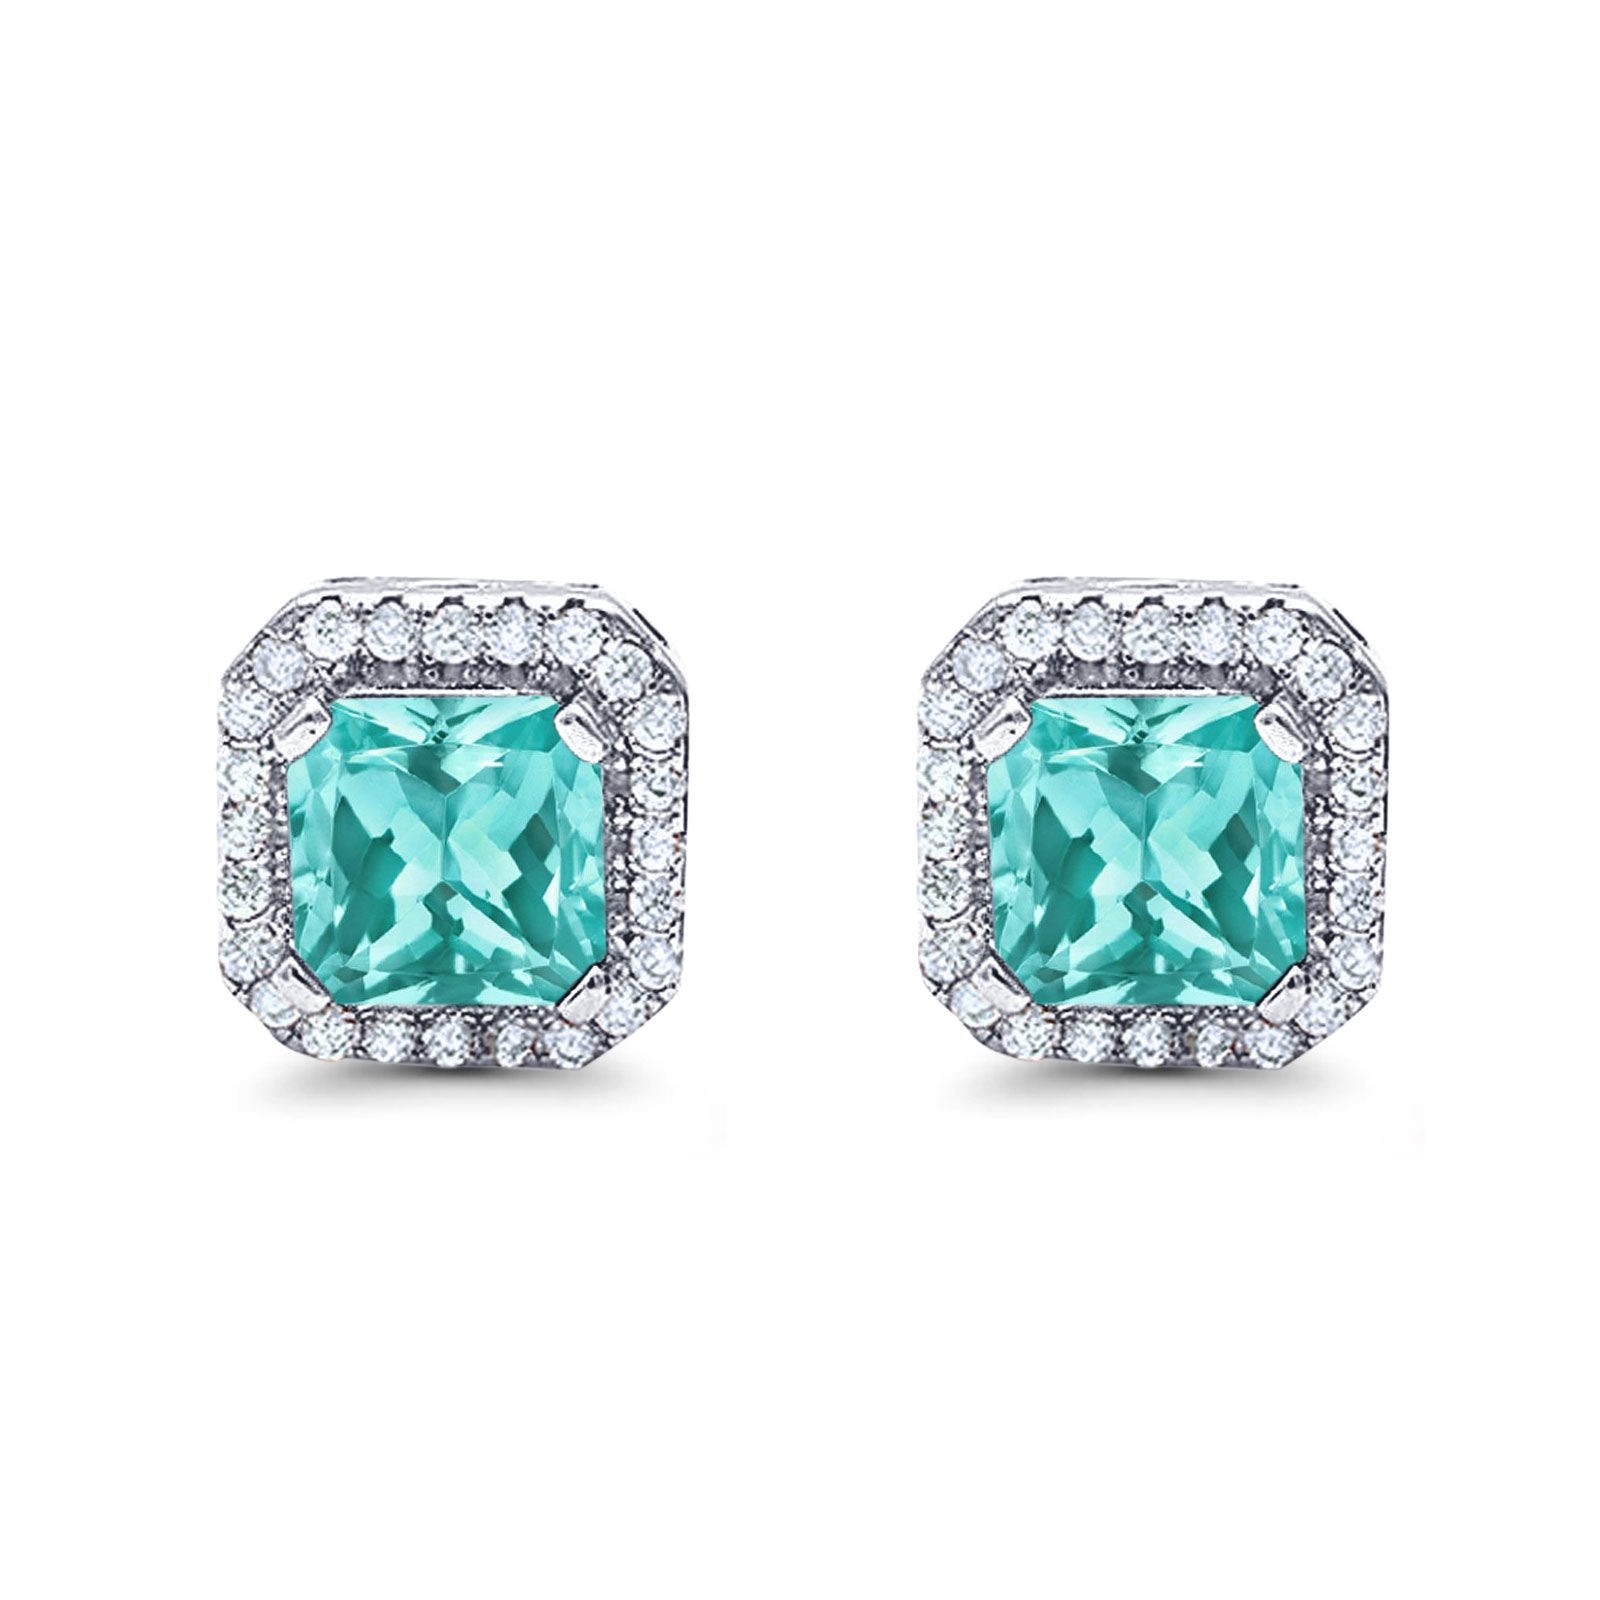 Stud Earrings Wedding Bridal Princess Simulated Cubic Zirconia Solid 925 Sterling Silver